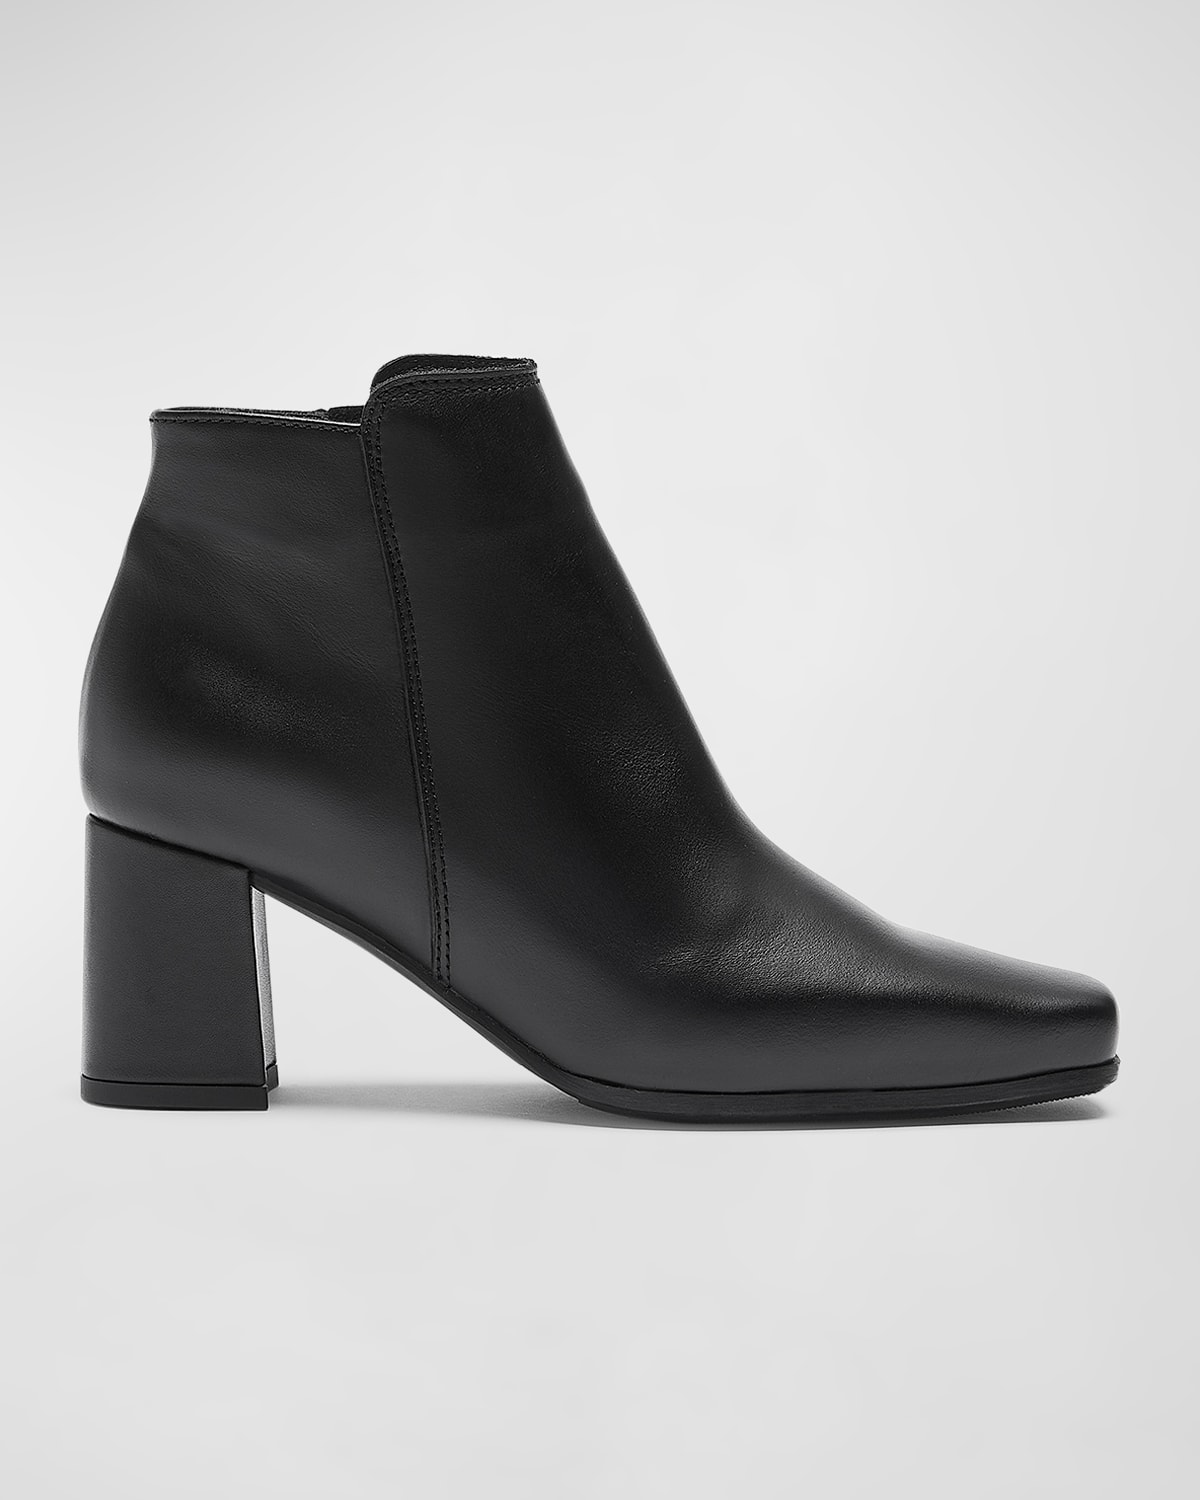 La Canadienne Tabitha Leather Ankle Booties